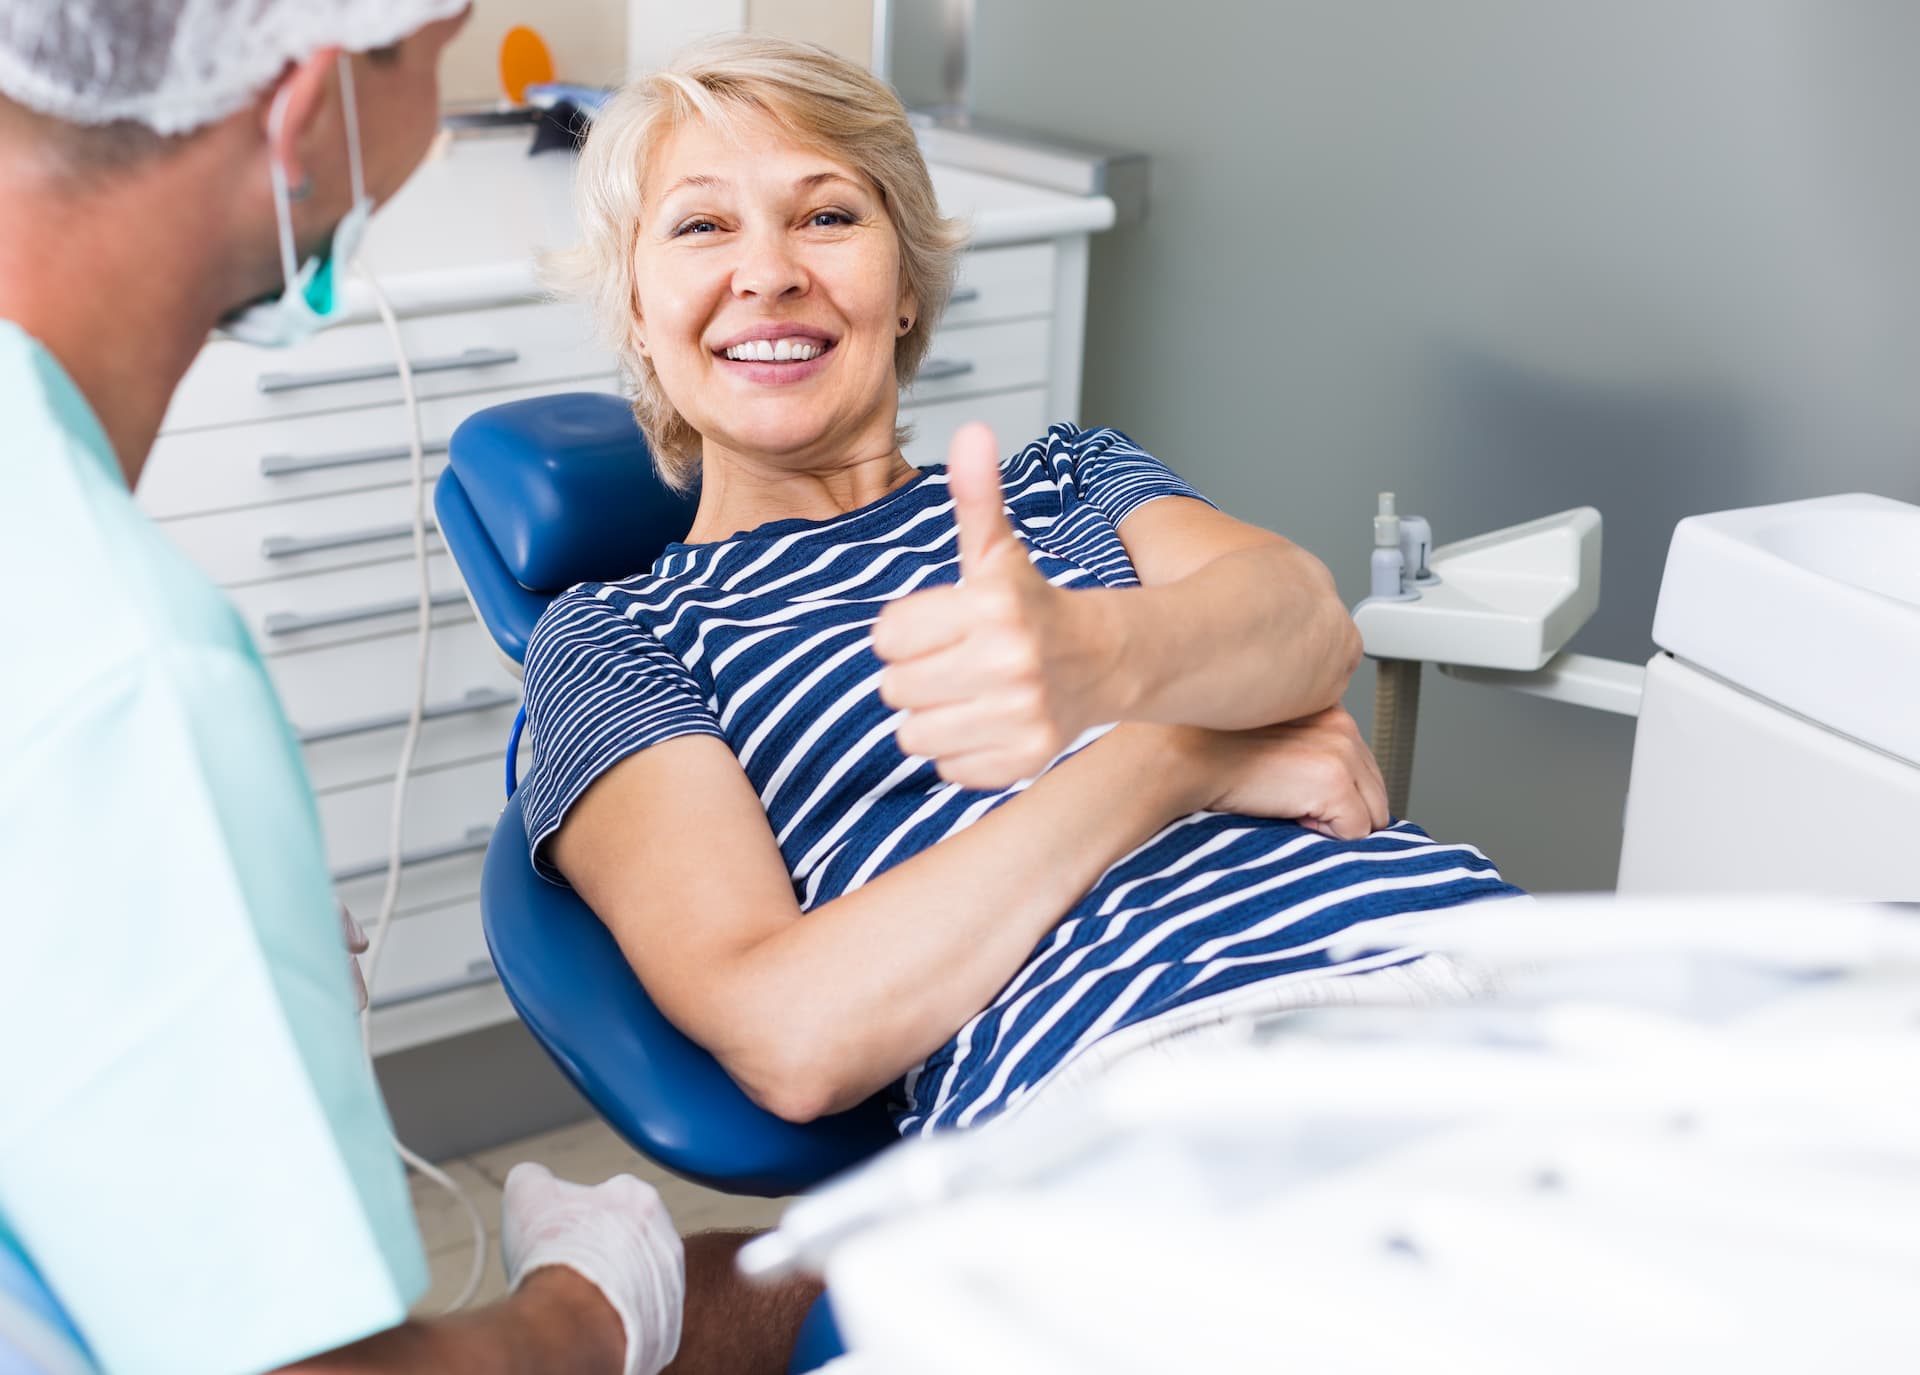 How to Work with Headstrong Dental Patients